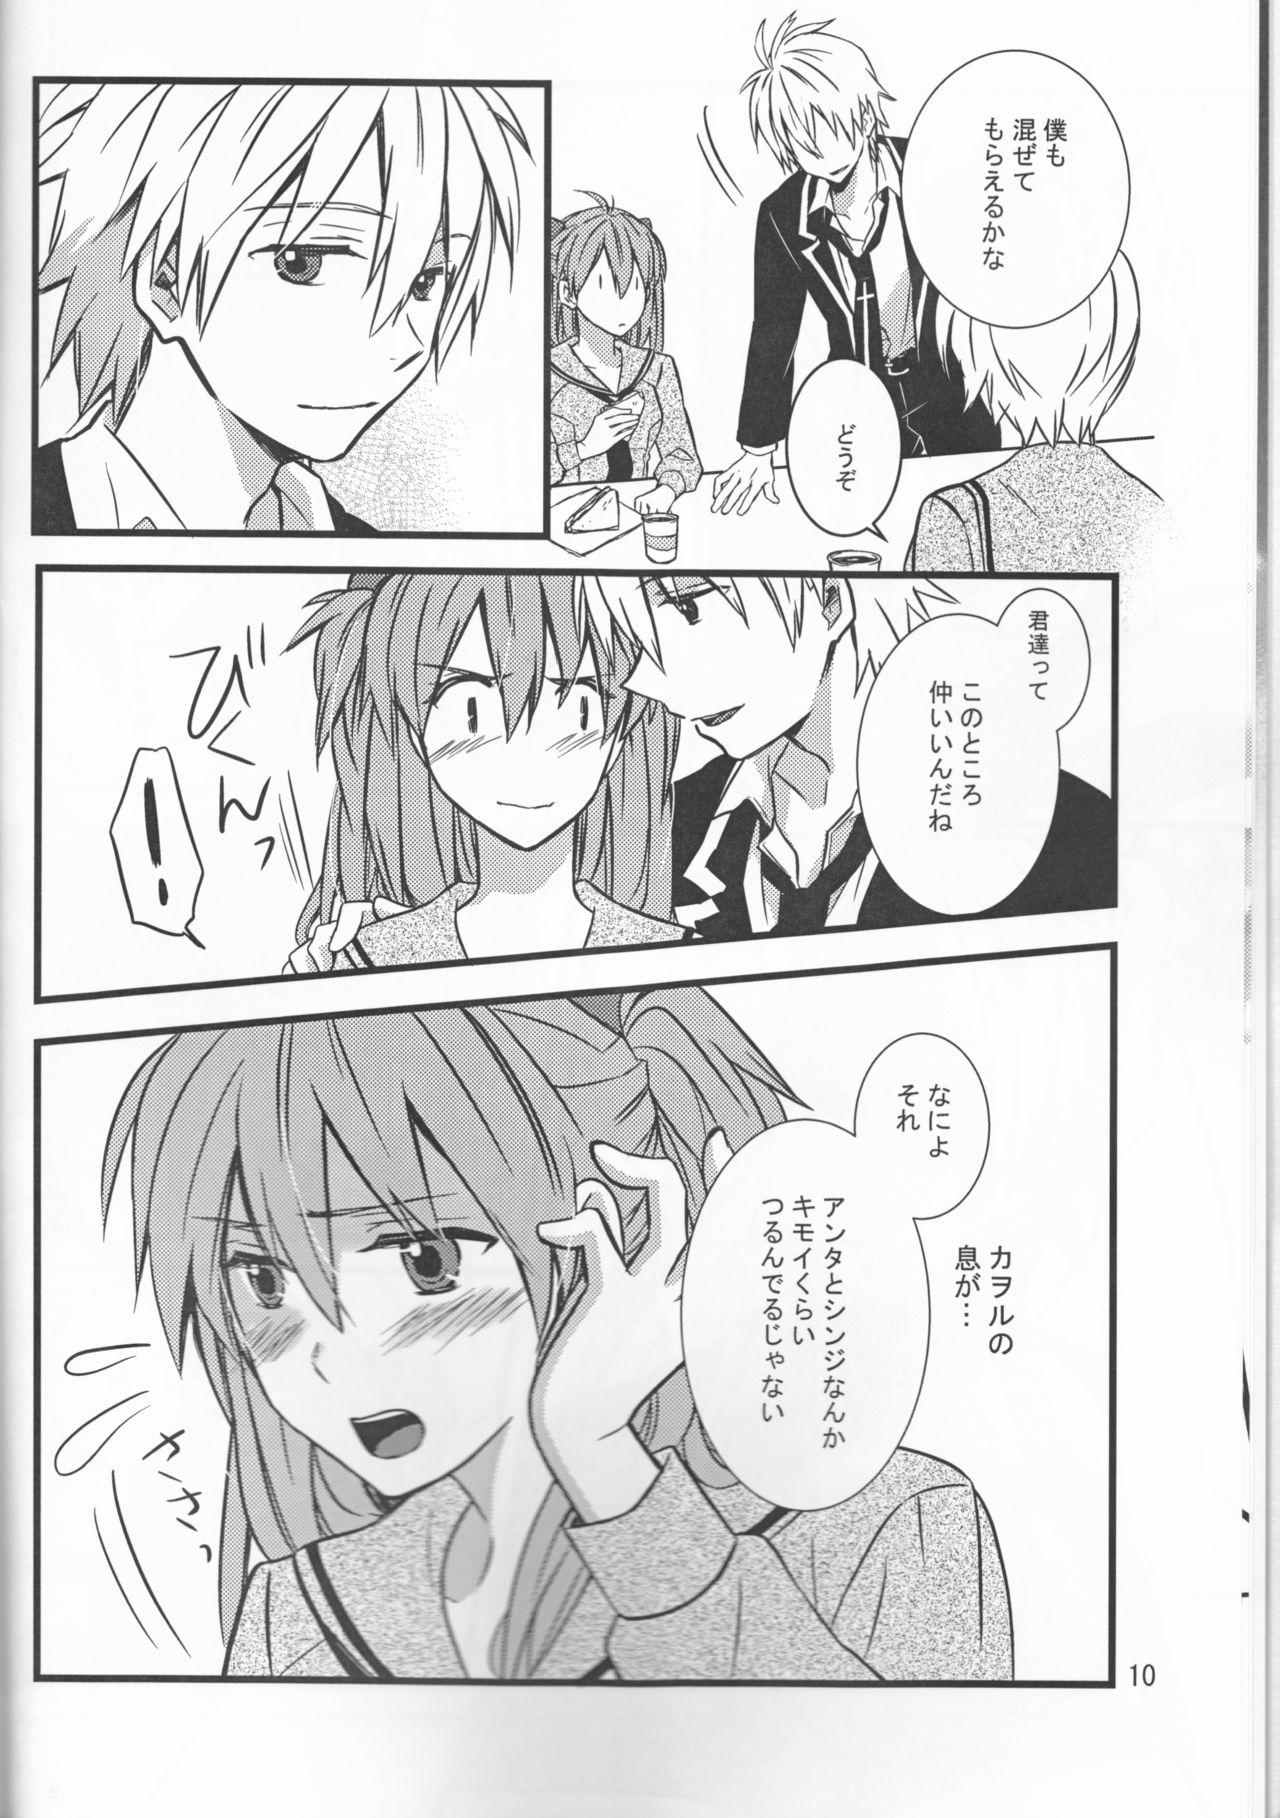 Pigtails KATHARSIS - Neon genesis evangelion Lolicon - Page 10